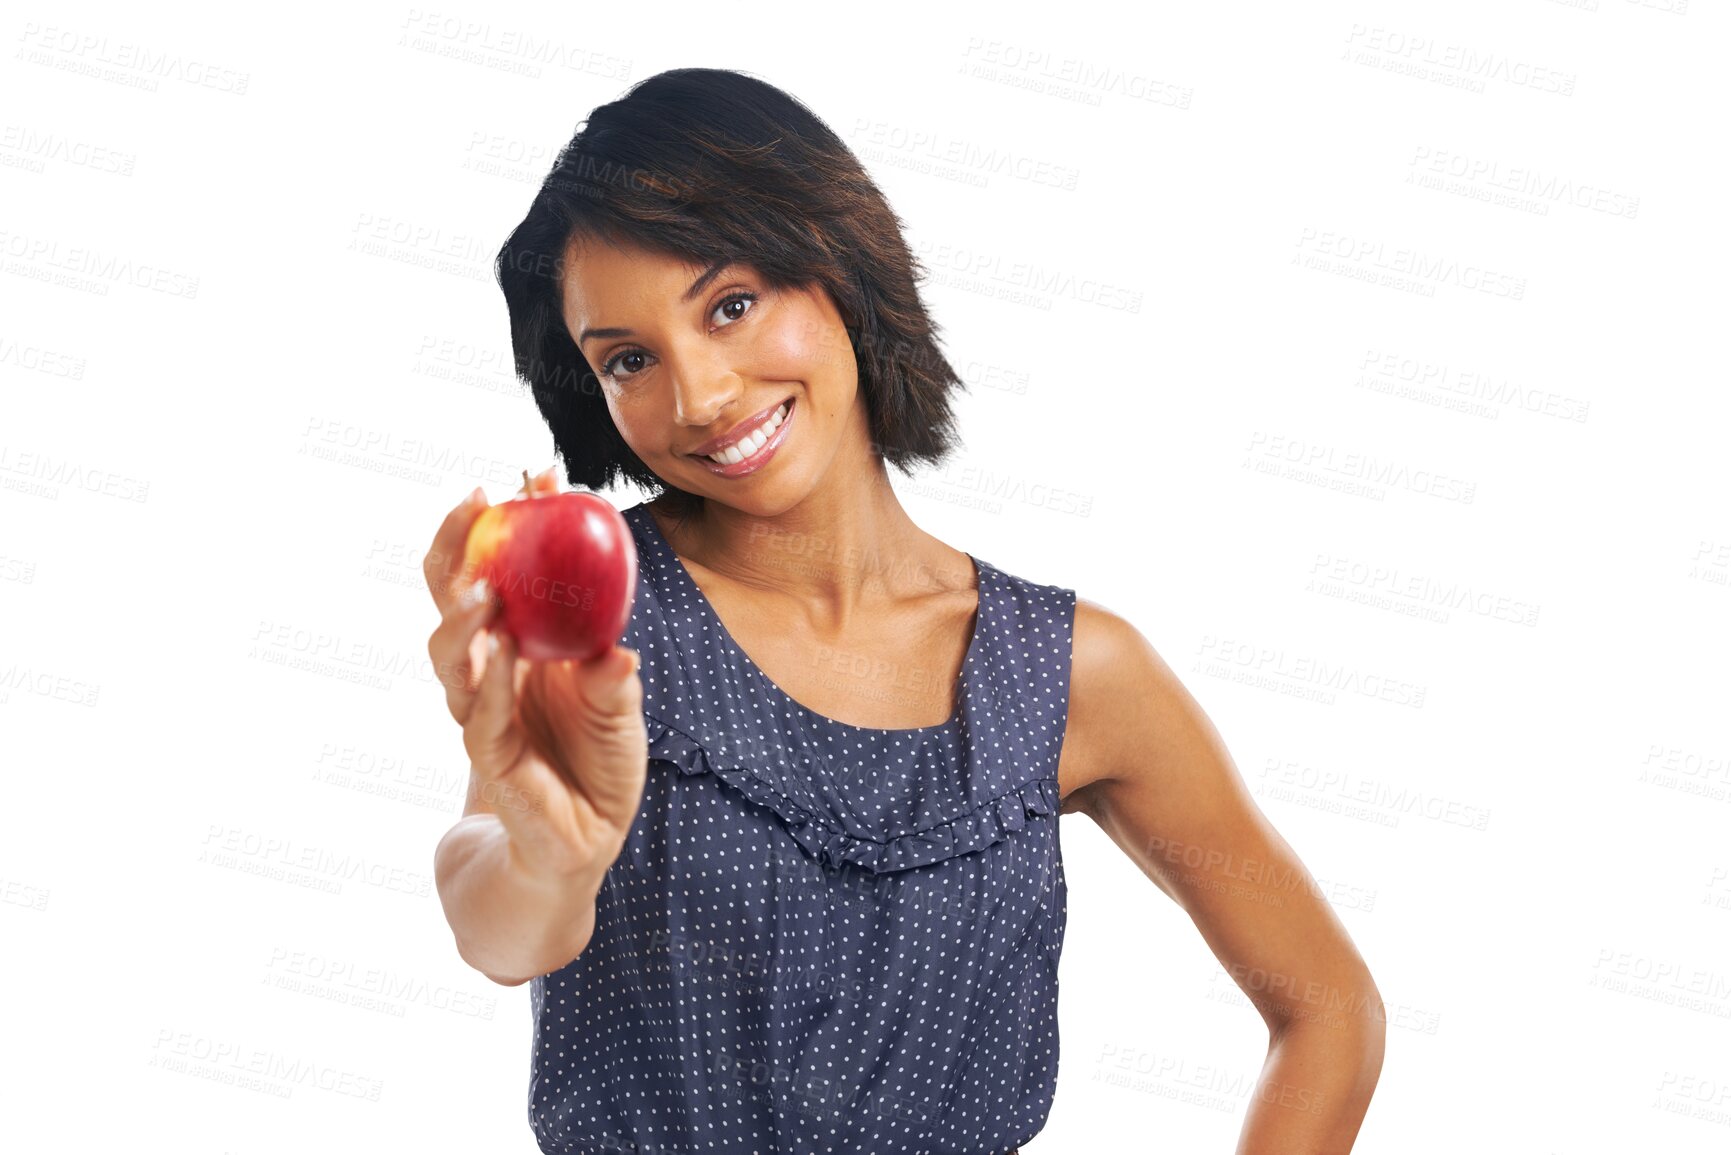 Buy stock photo Apple fruit presentation, portrait and happy woman with vegan product for hungry snack, healthy food or body detox. Happiness, nutritionist offer and person isolated on a transparent, png background
